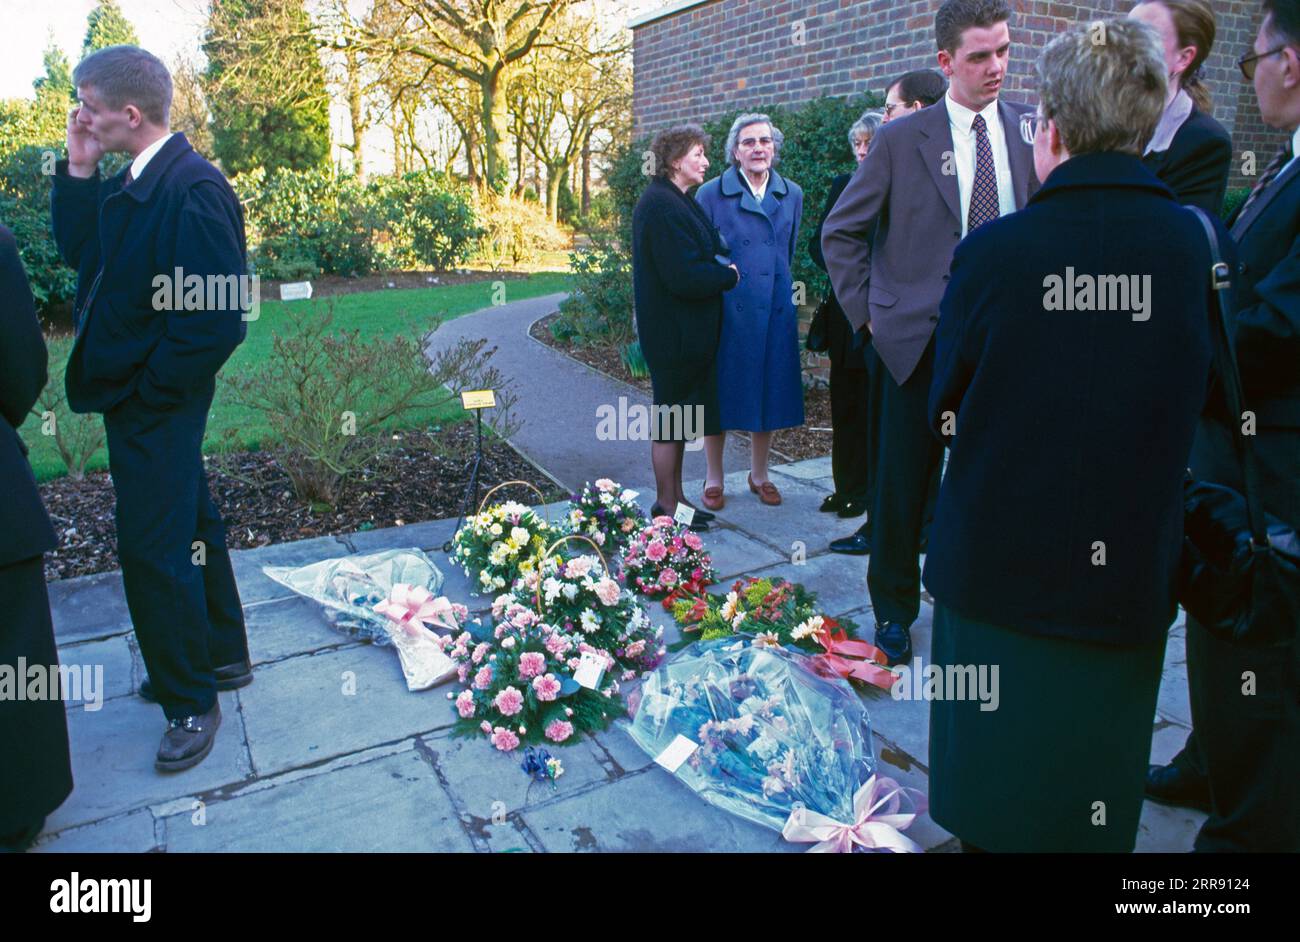 Mourners Outside After Cremation Flowers On Ground in Remembrance England Stock Photo